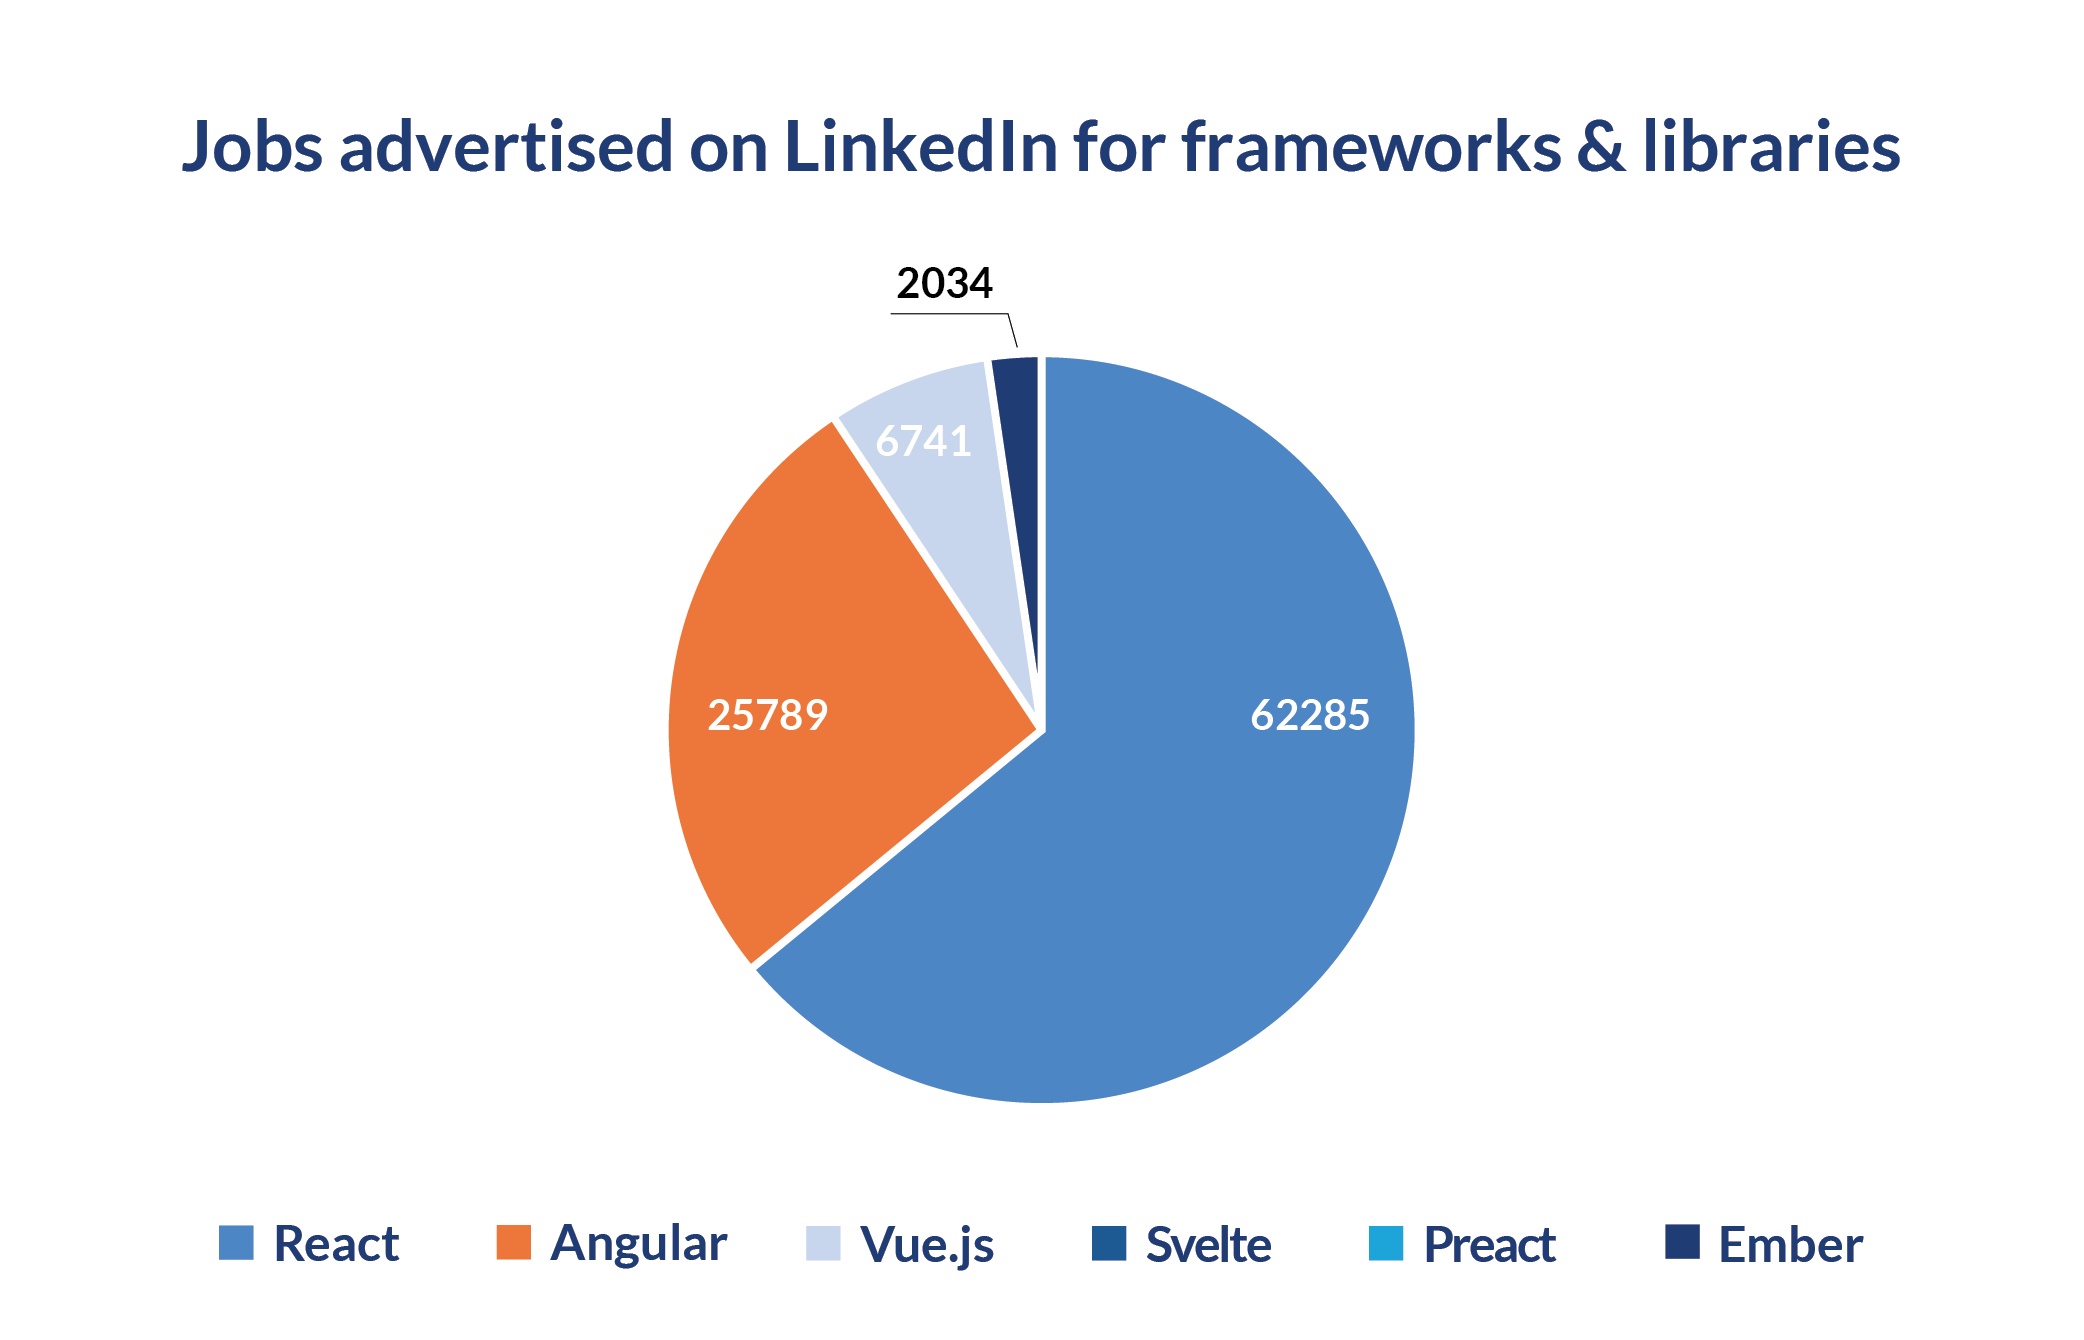 Pie chart showing number of vacancies advertised on LinkedIn by popular front end JavaScript frameworks 2023